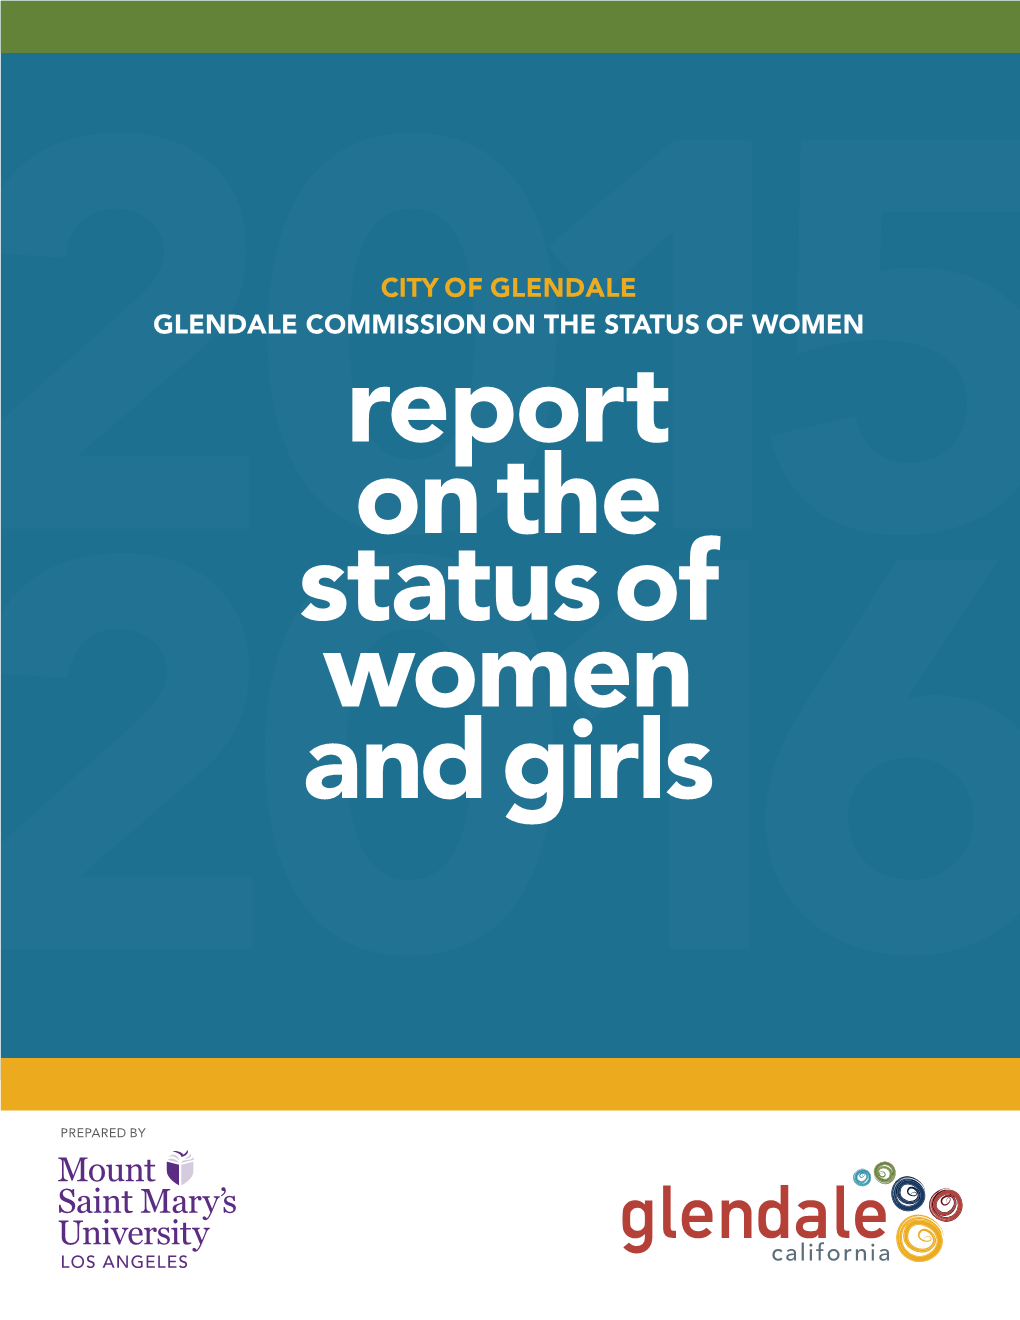 The City of Glendale Report on the Status of Women and Girls